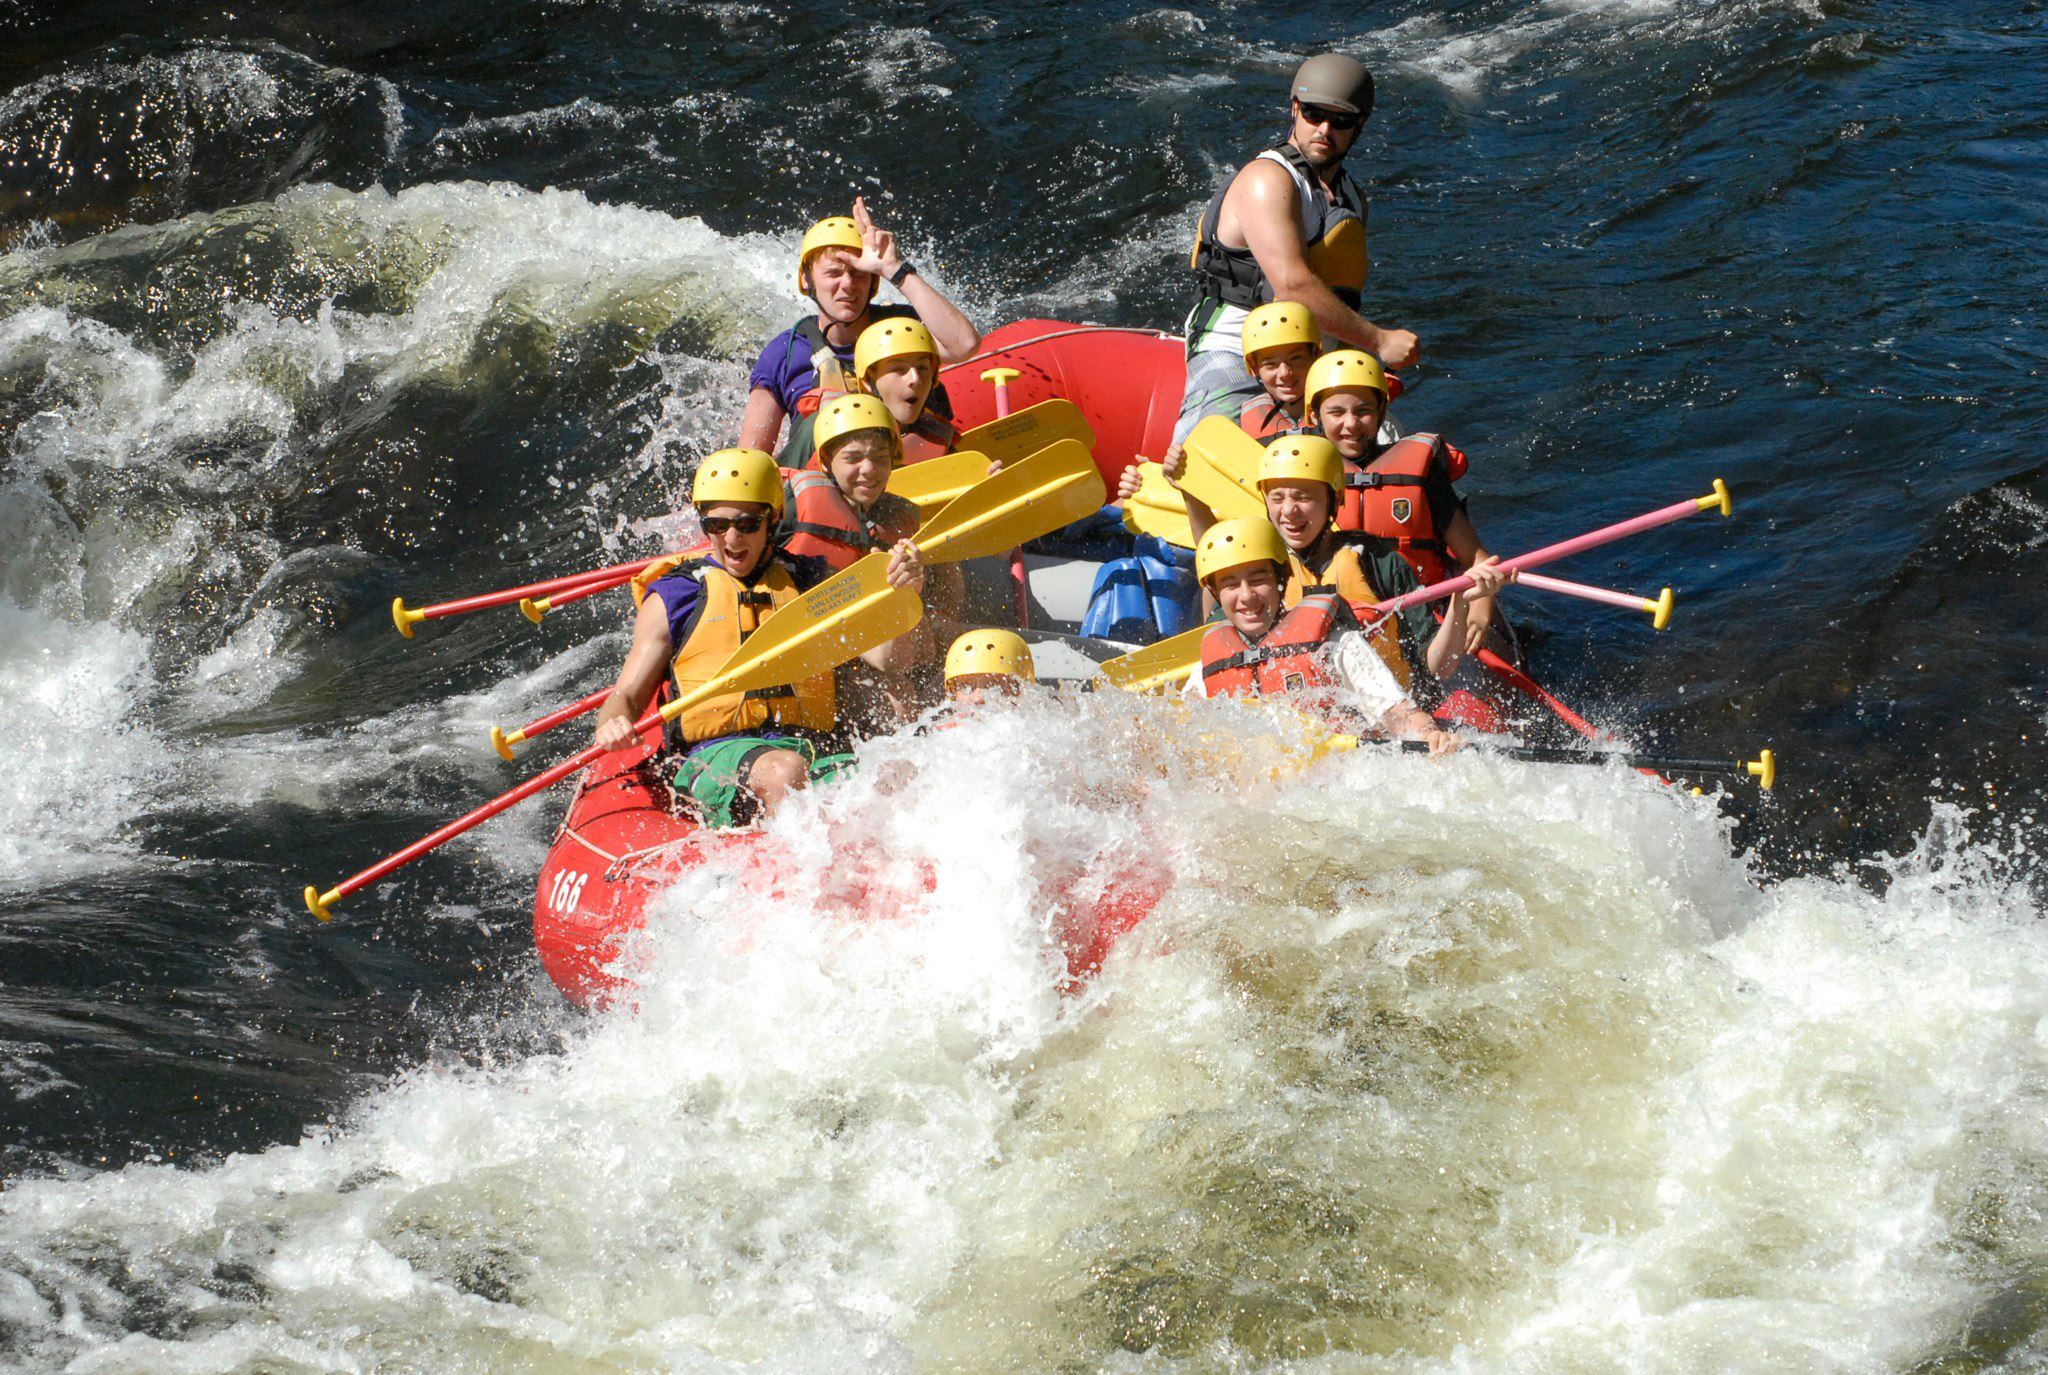 group of people whitewater rafting in the Adirondacks